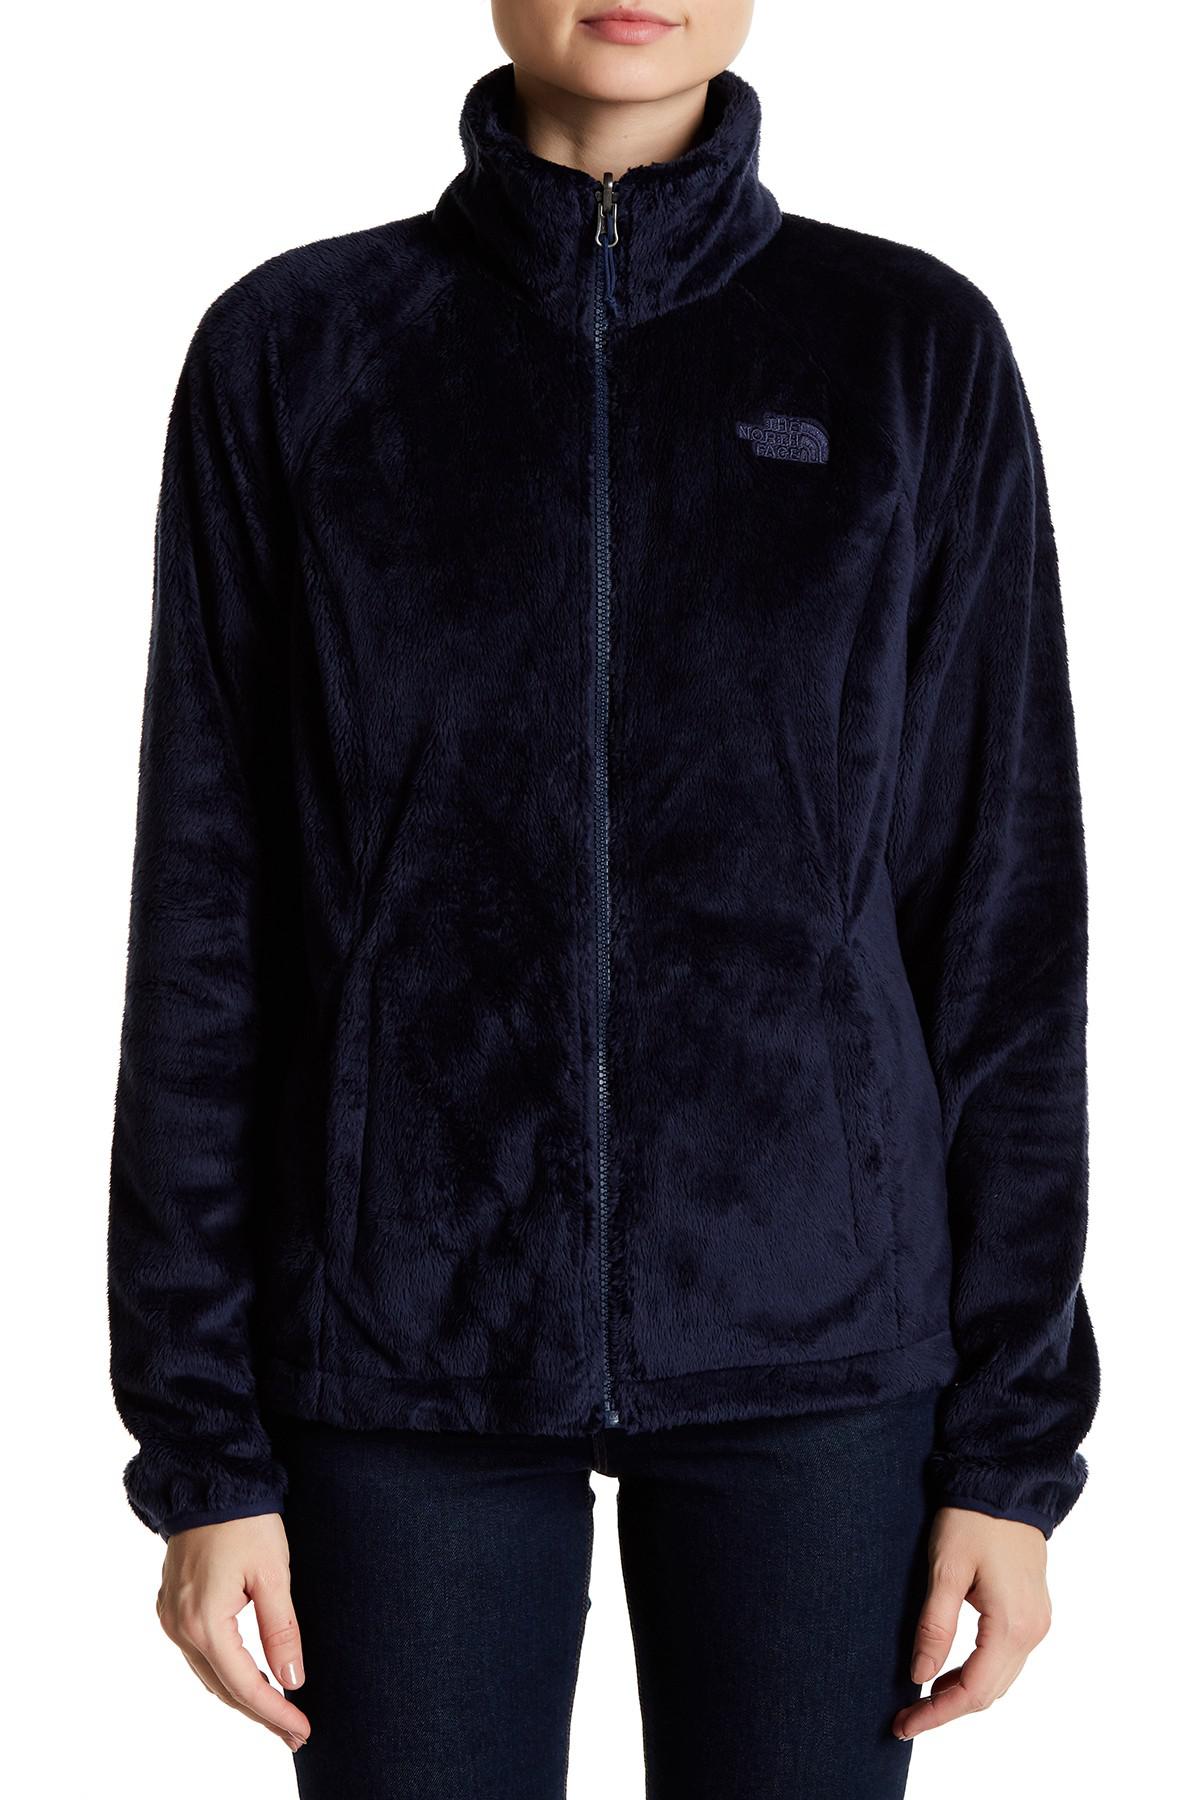 Lyst - The North Face Faux Fur Lined Boundary Triclimate Jacket in Blue